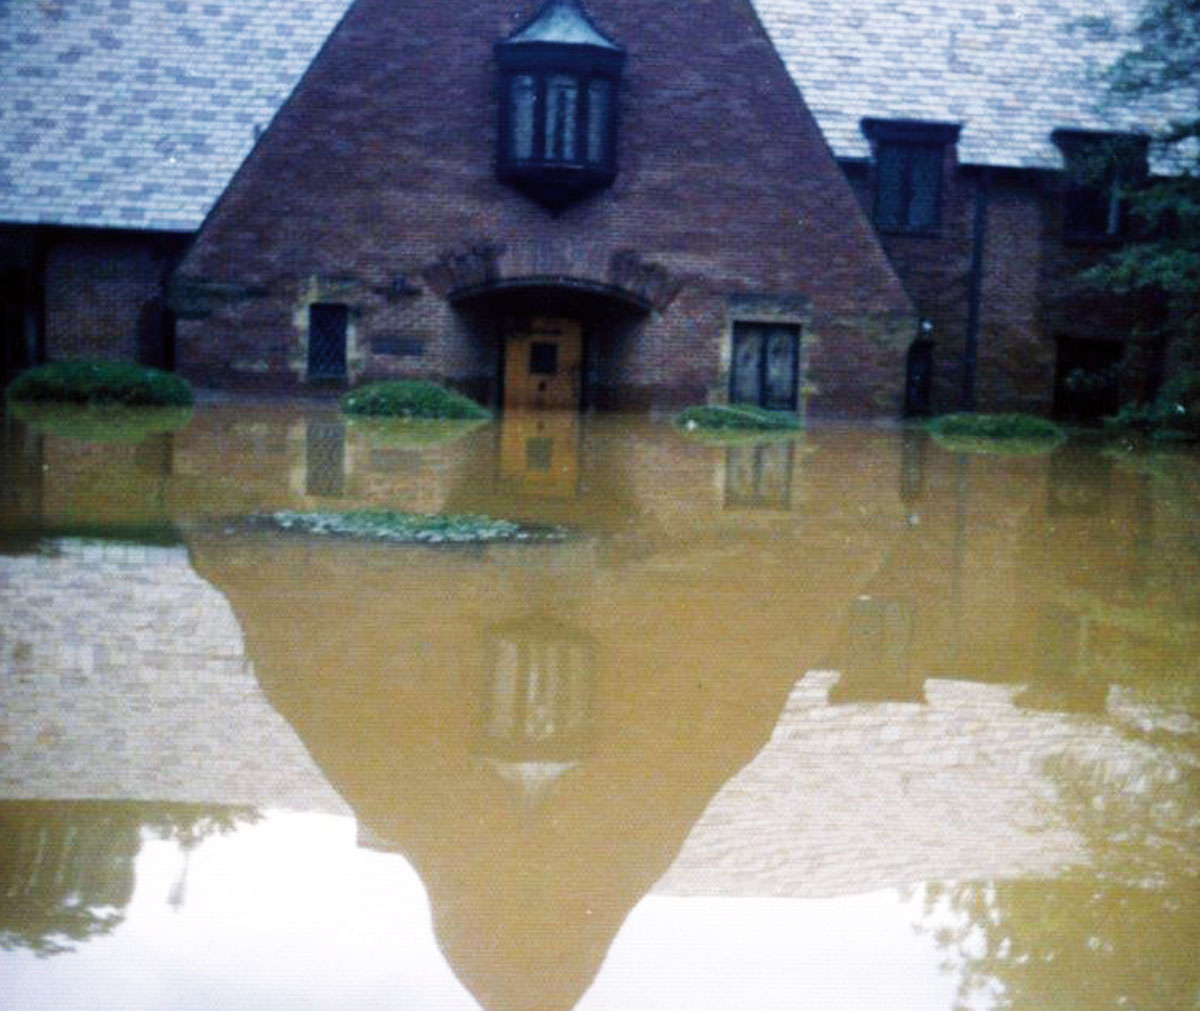 Lewisburg resident Owen Mahon image of flooded home